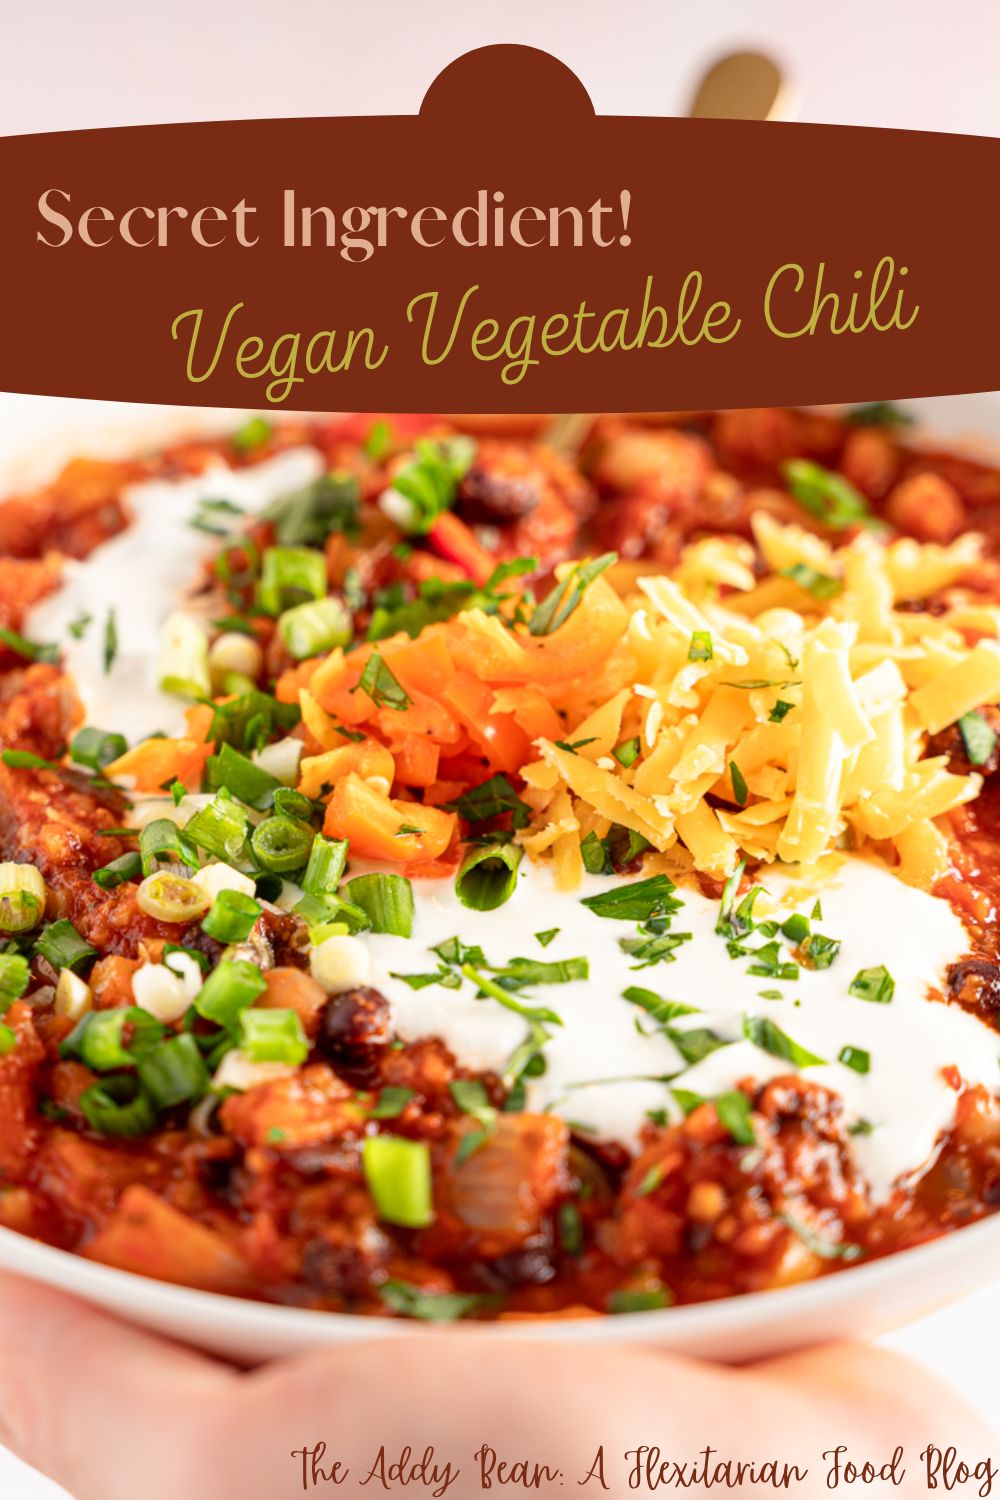 Secret Ingredient Vegan Vegetable Chili banner over a big bowl of chili enclosed in two hands.